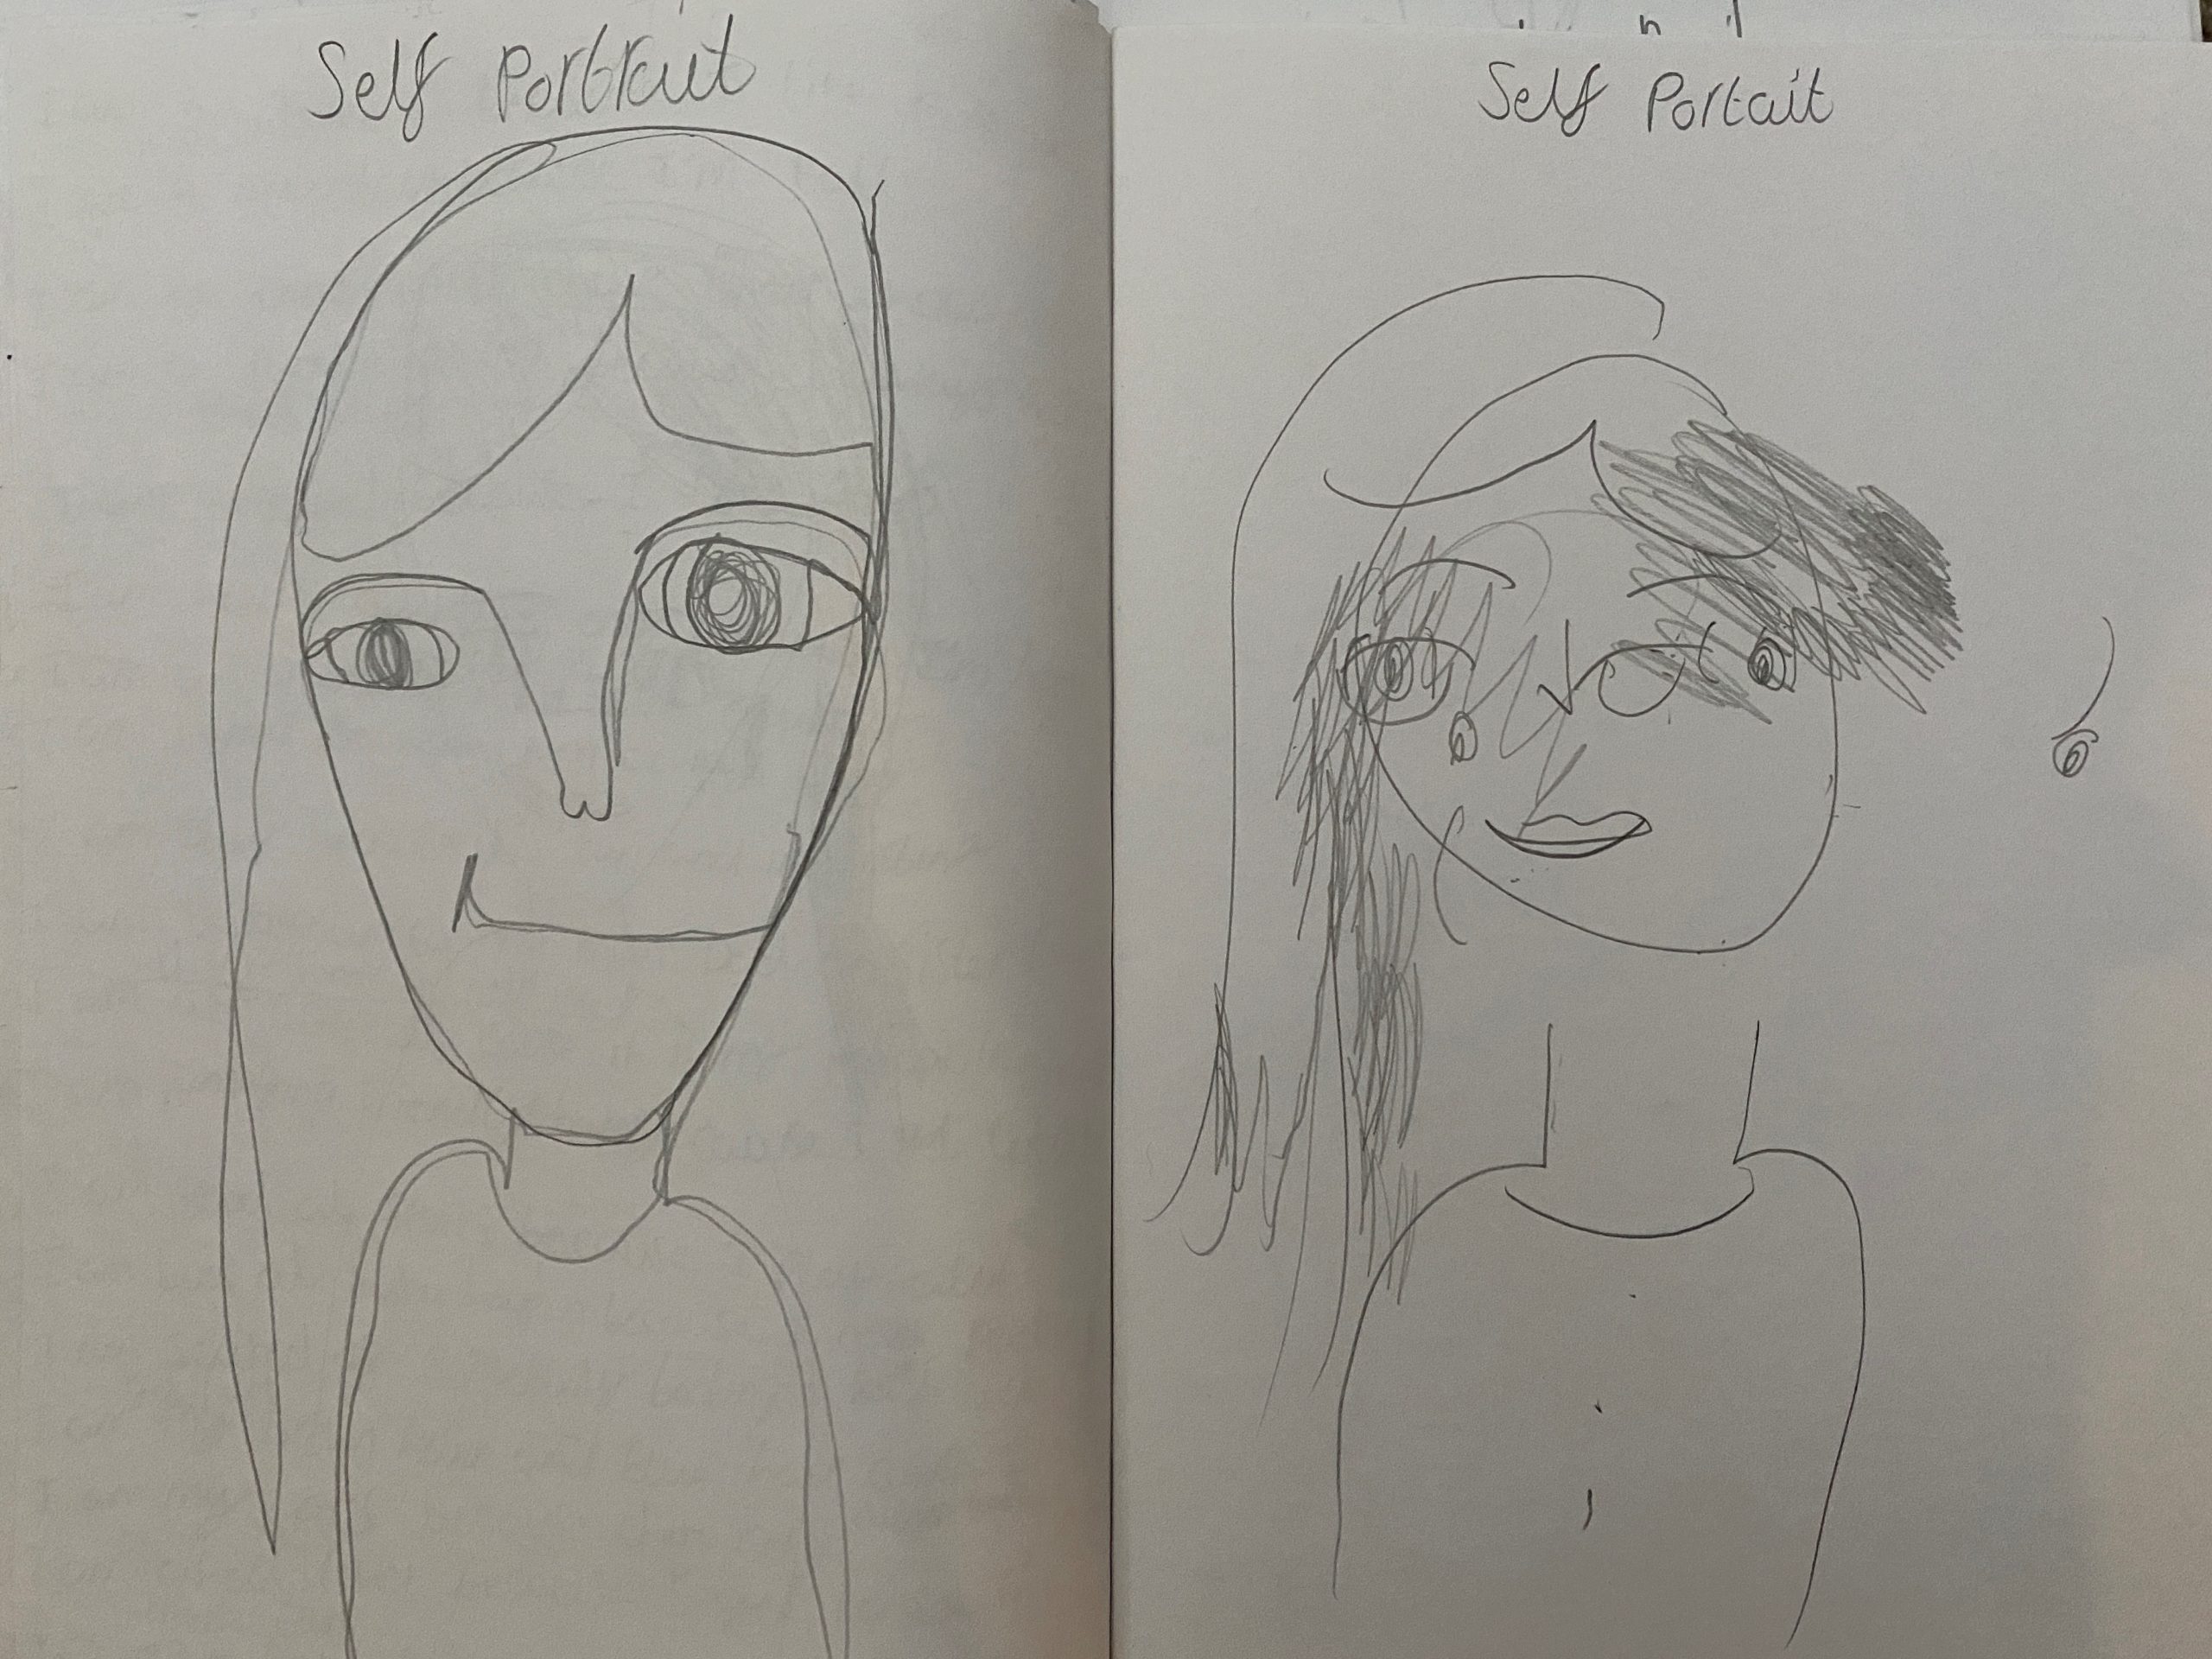 Two self-portraits, one drawn without looking